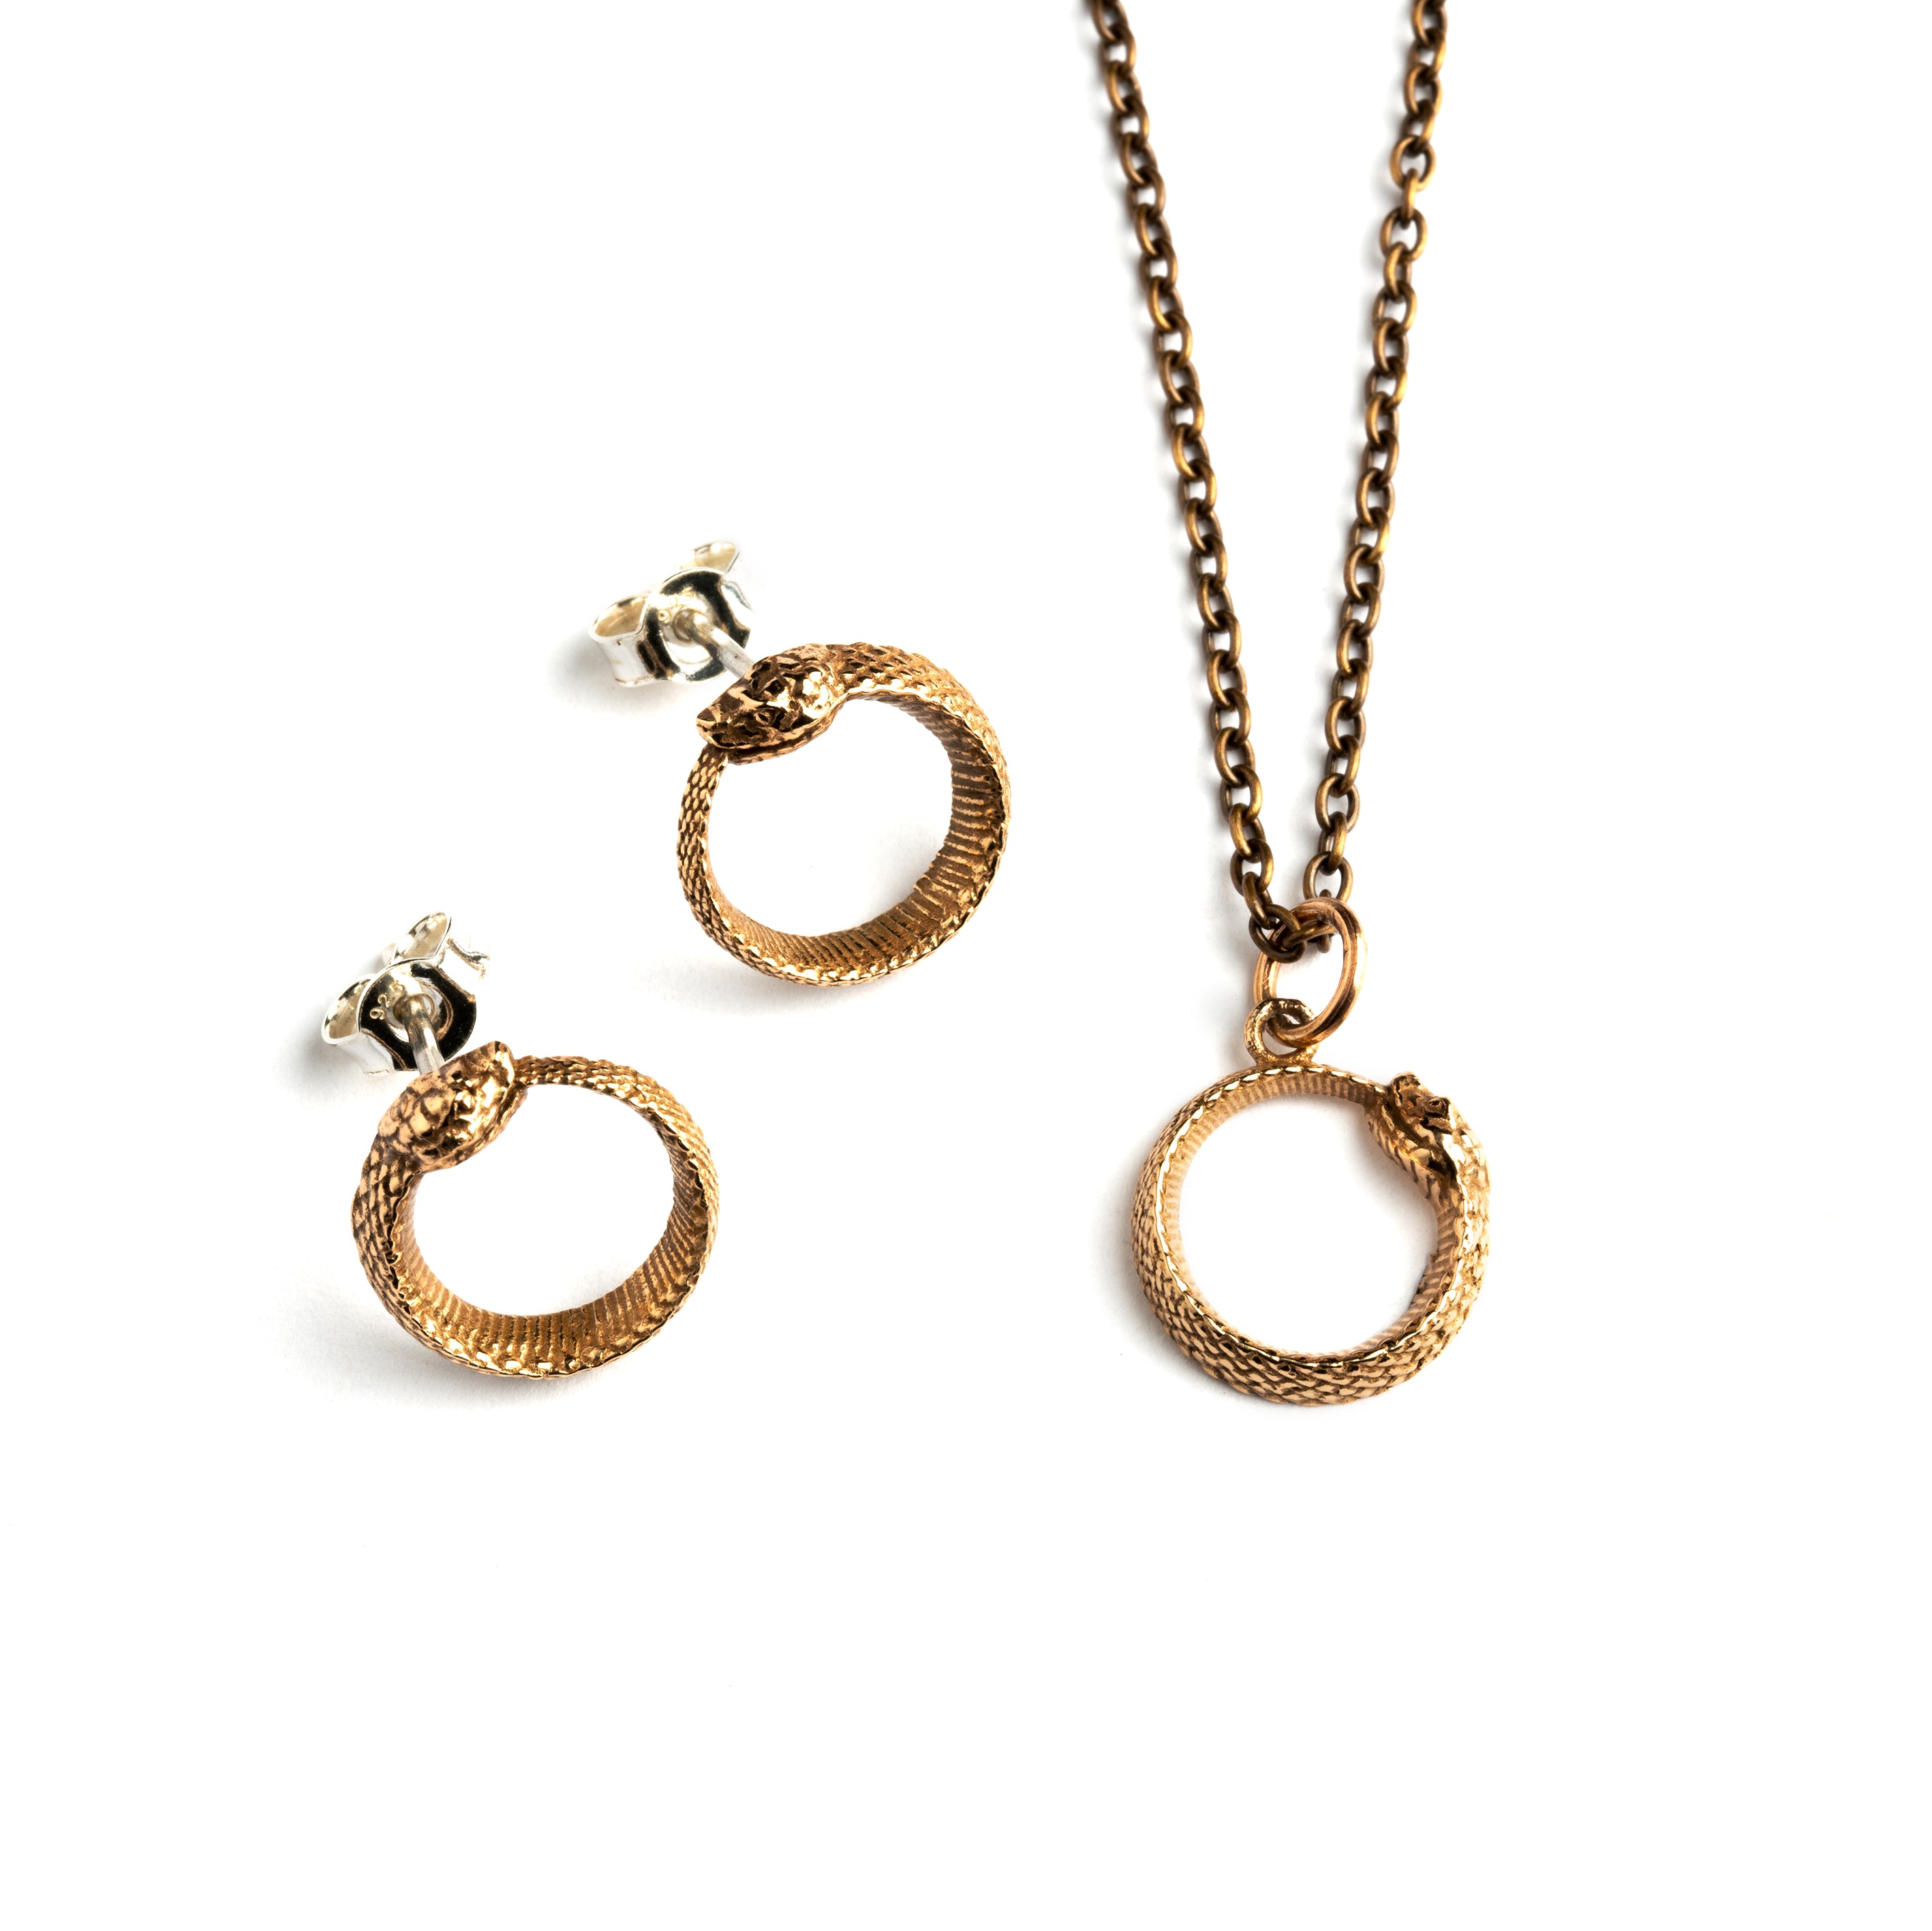 Tiny Bronze Ouroboros snake Charm necklace and pair of Ouroboros stud earrings